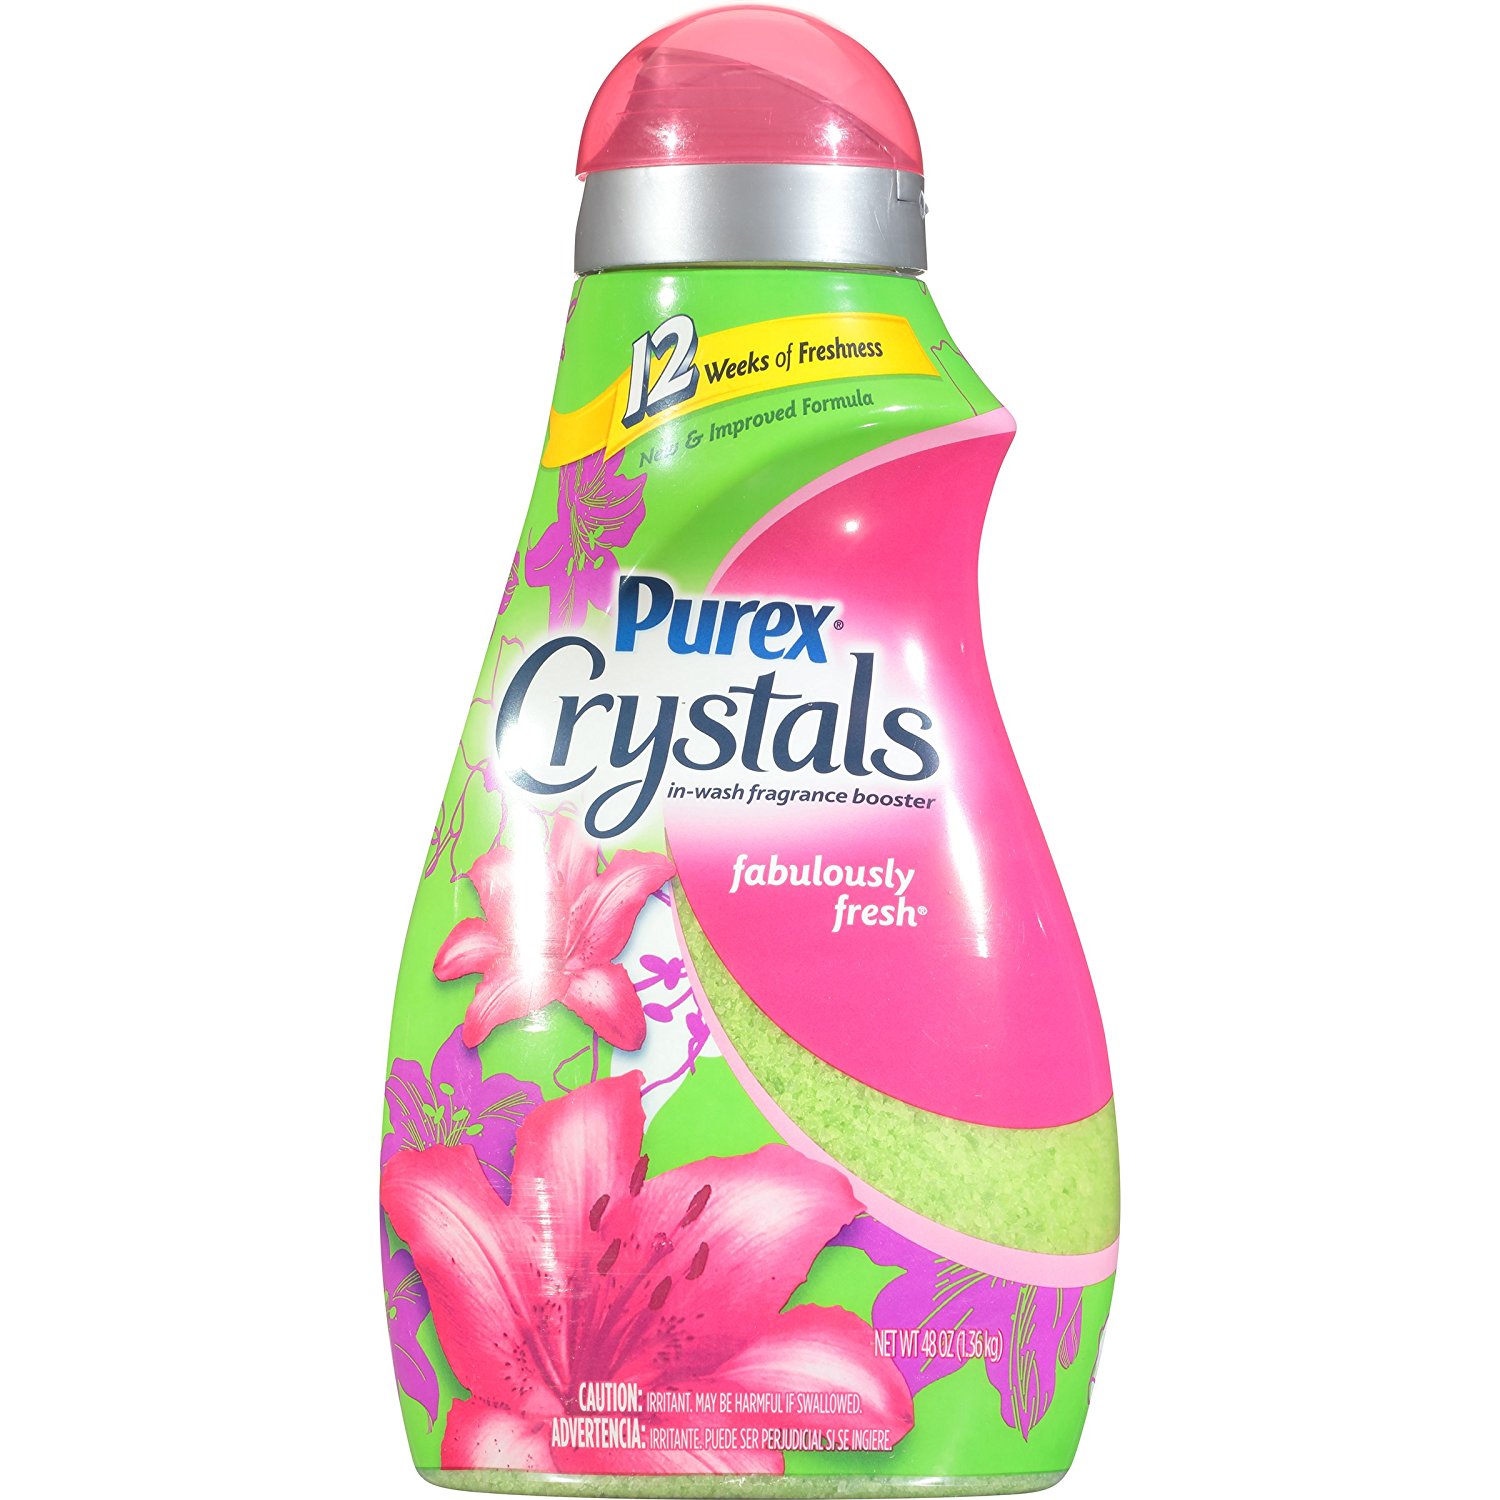 Purex Crystals In-Wash Fragrance Booster (Fabulously Fresh) 48oz Only $5.62 Shipped!